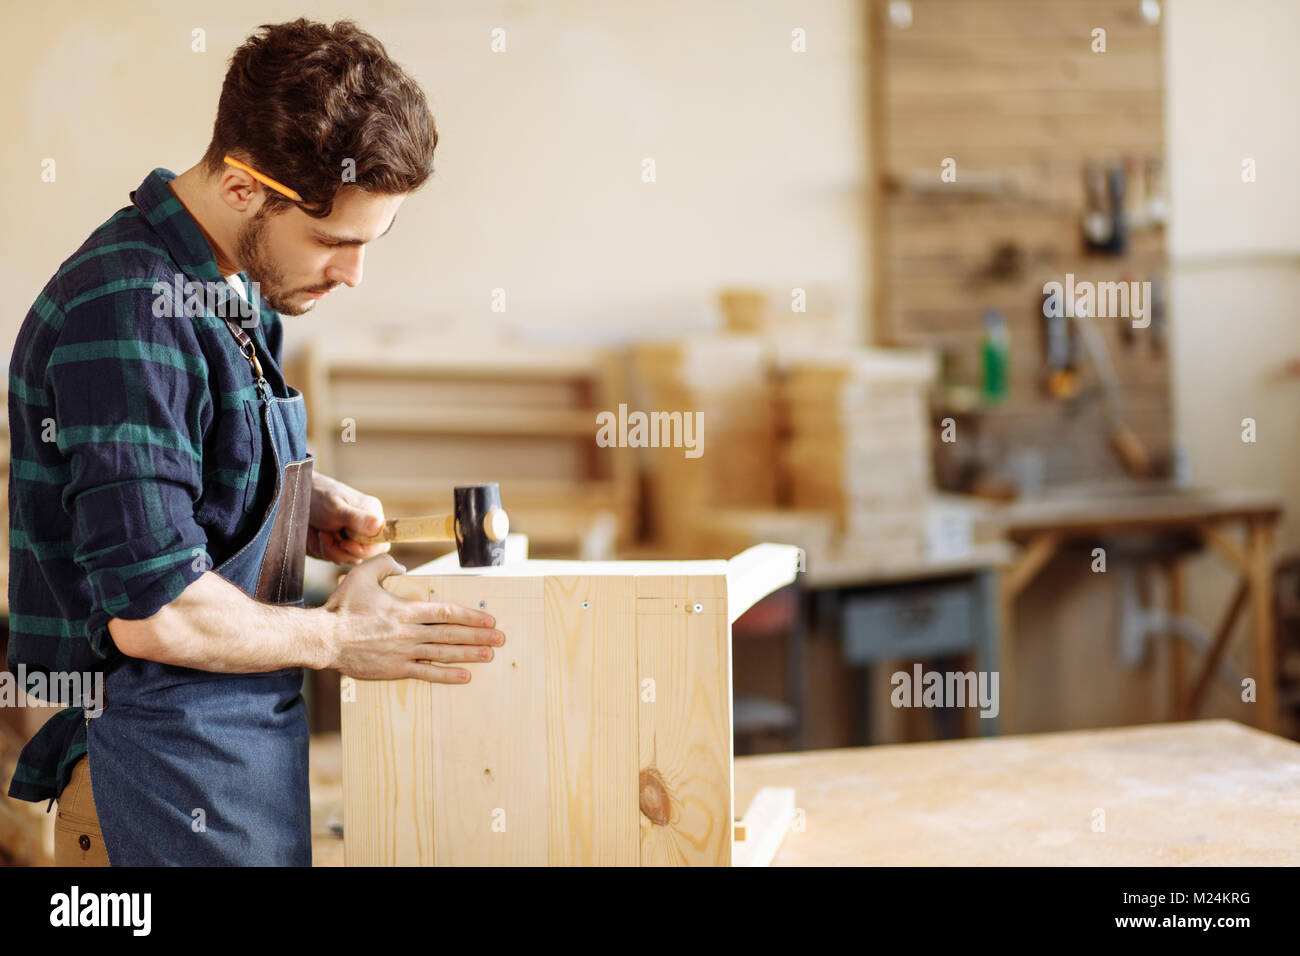 carpenter hammering a nail into wooden board Stock Photo - Alamy